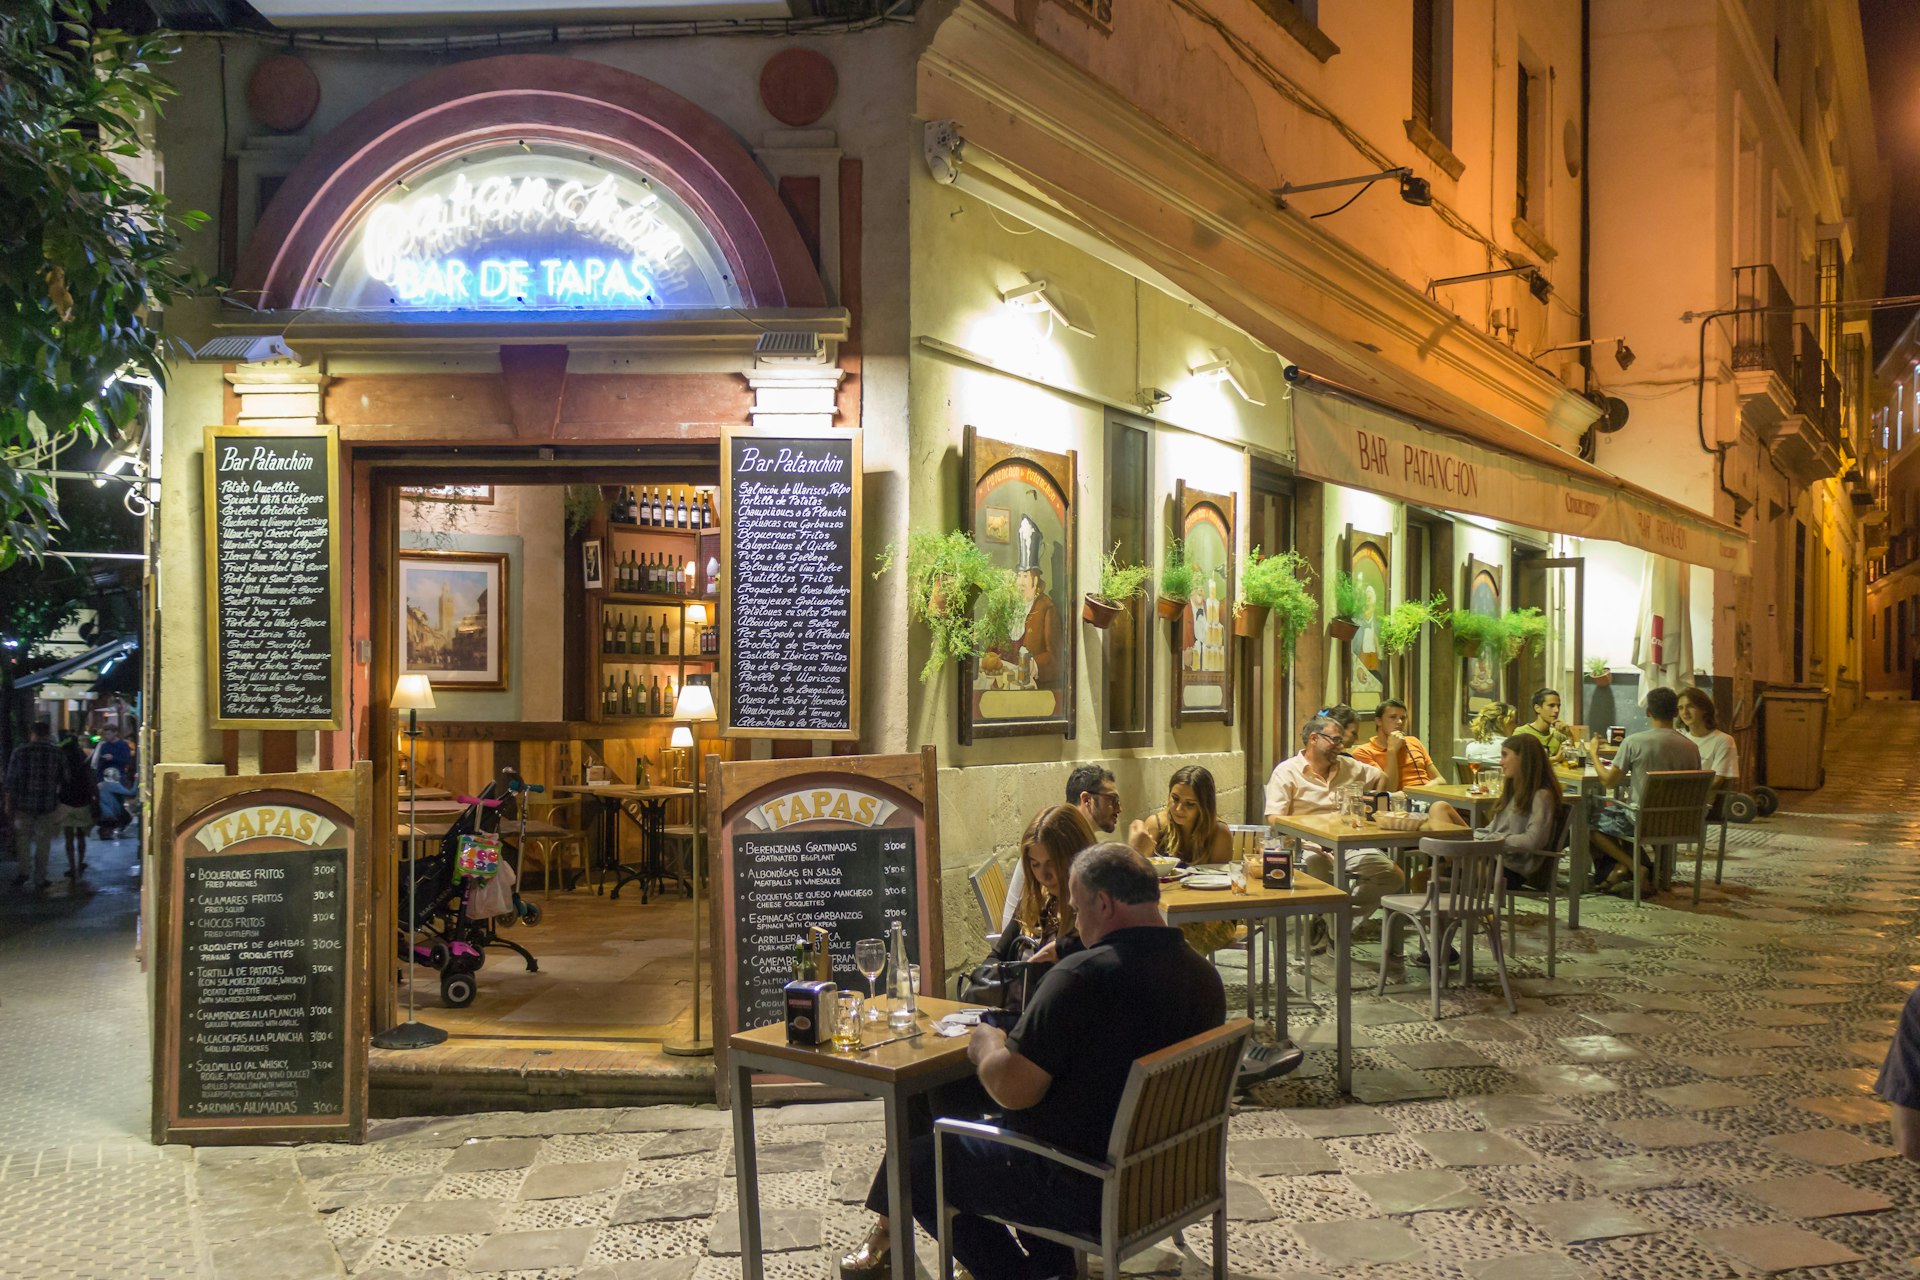 Spain in summer is all about outdoor eating and drinking especially in places like old Seville.